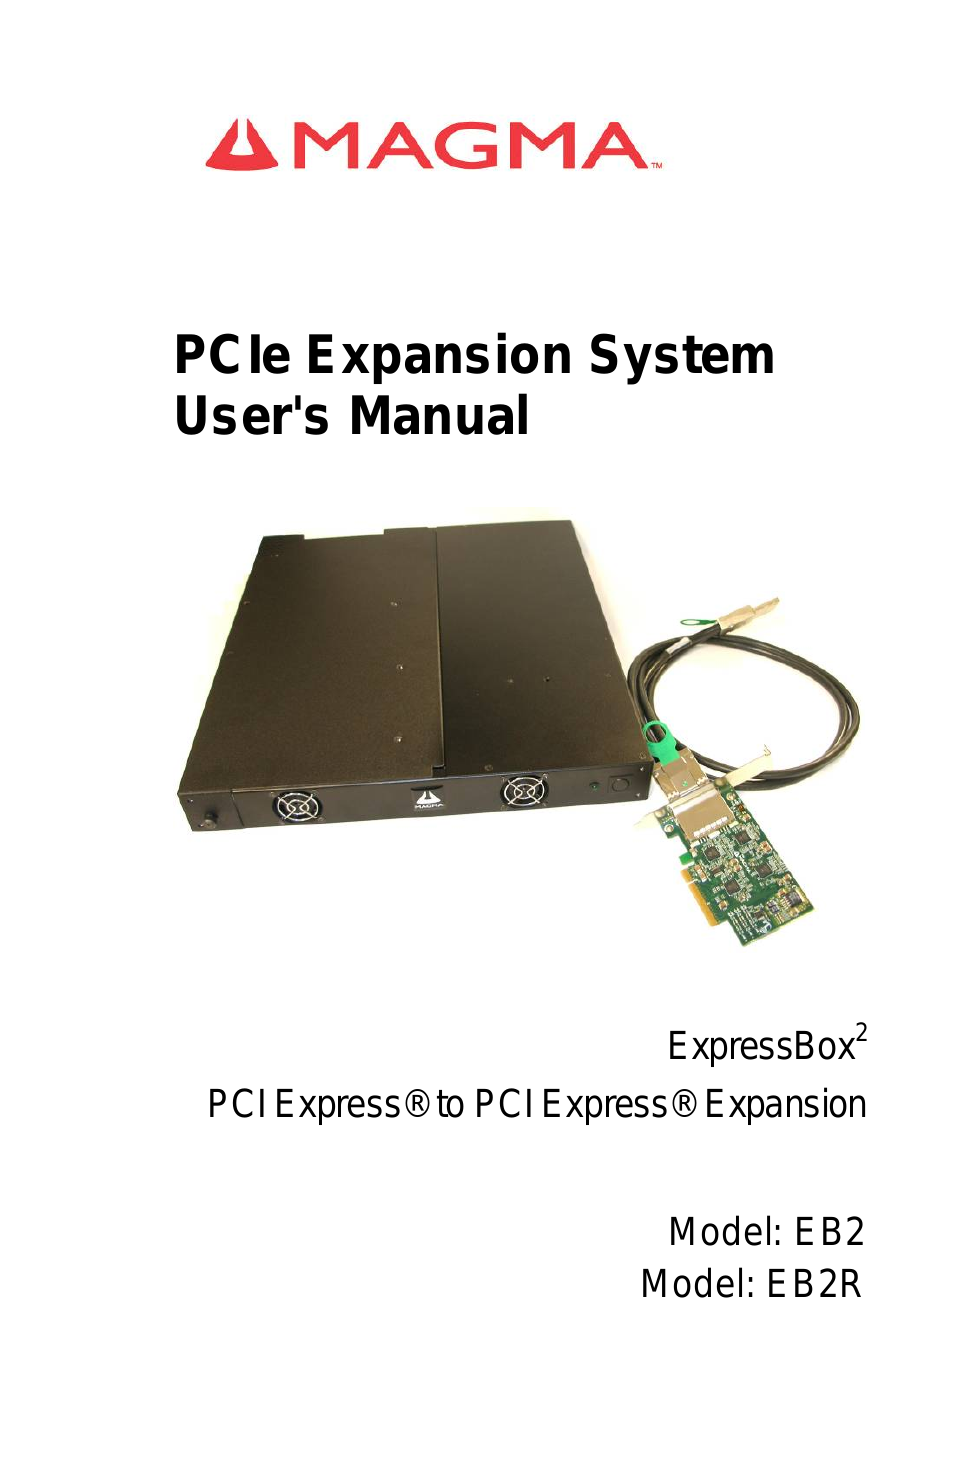 PCIe Expansion System EB2